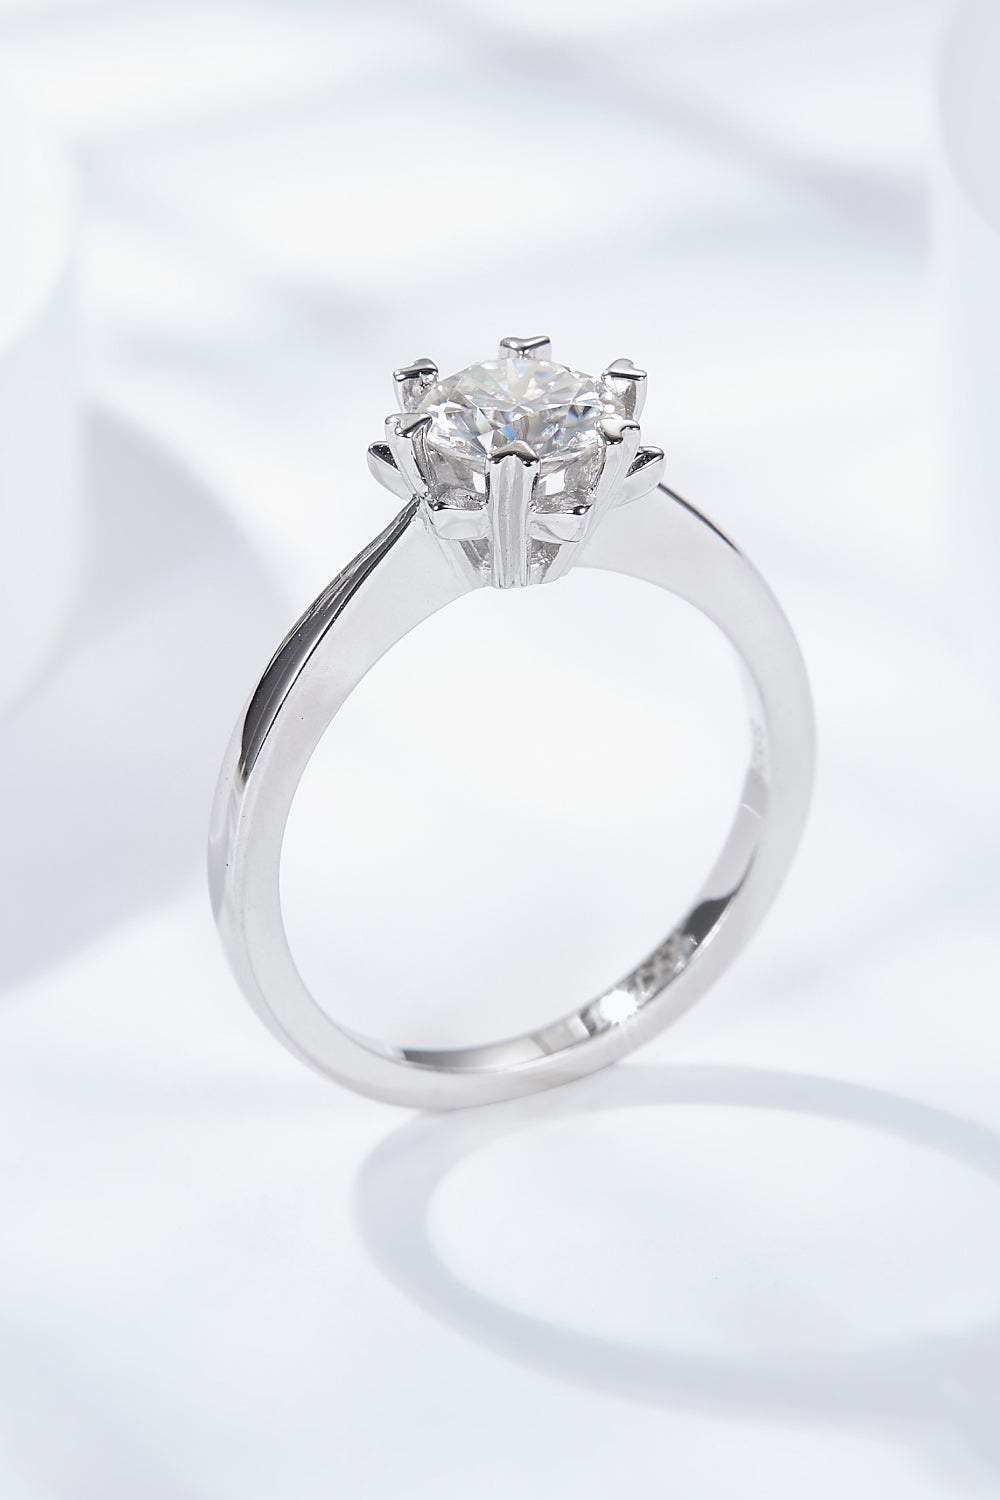 Solitaire Moissanite Ring Image2